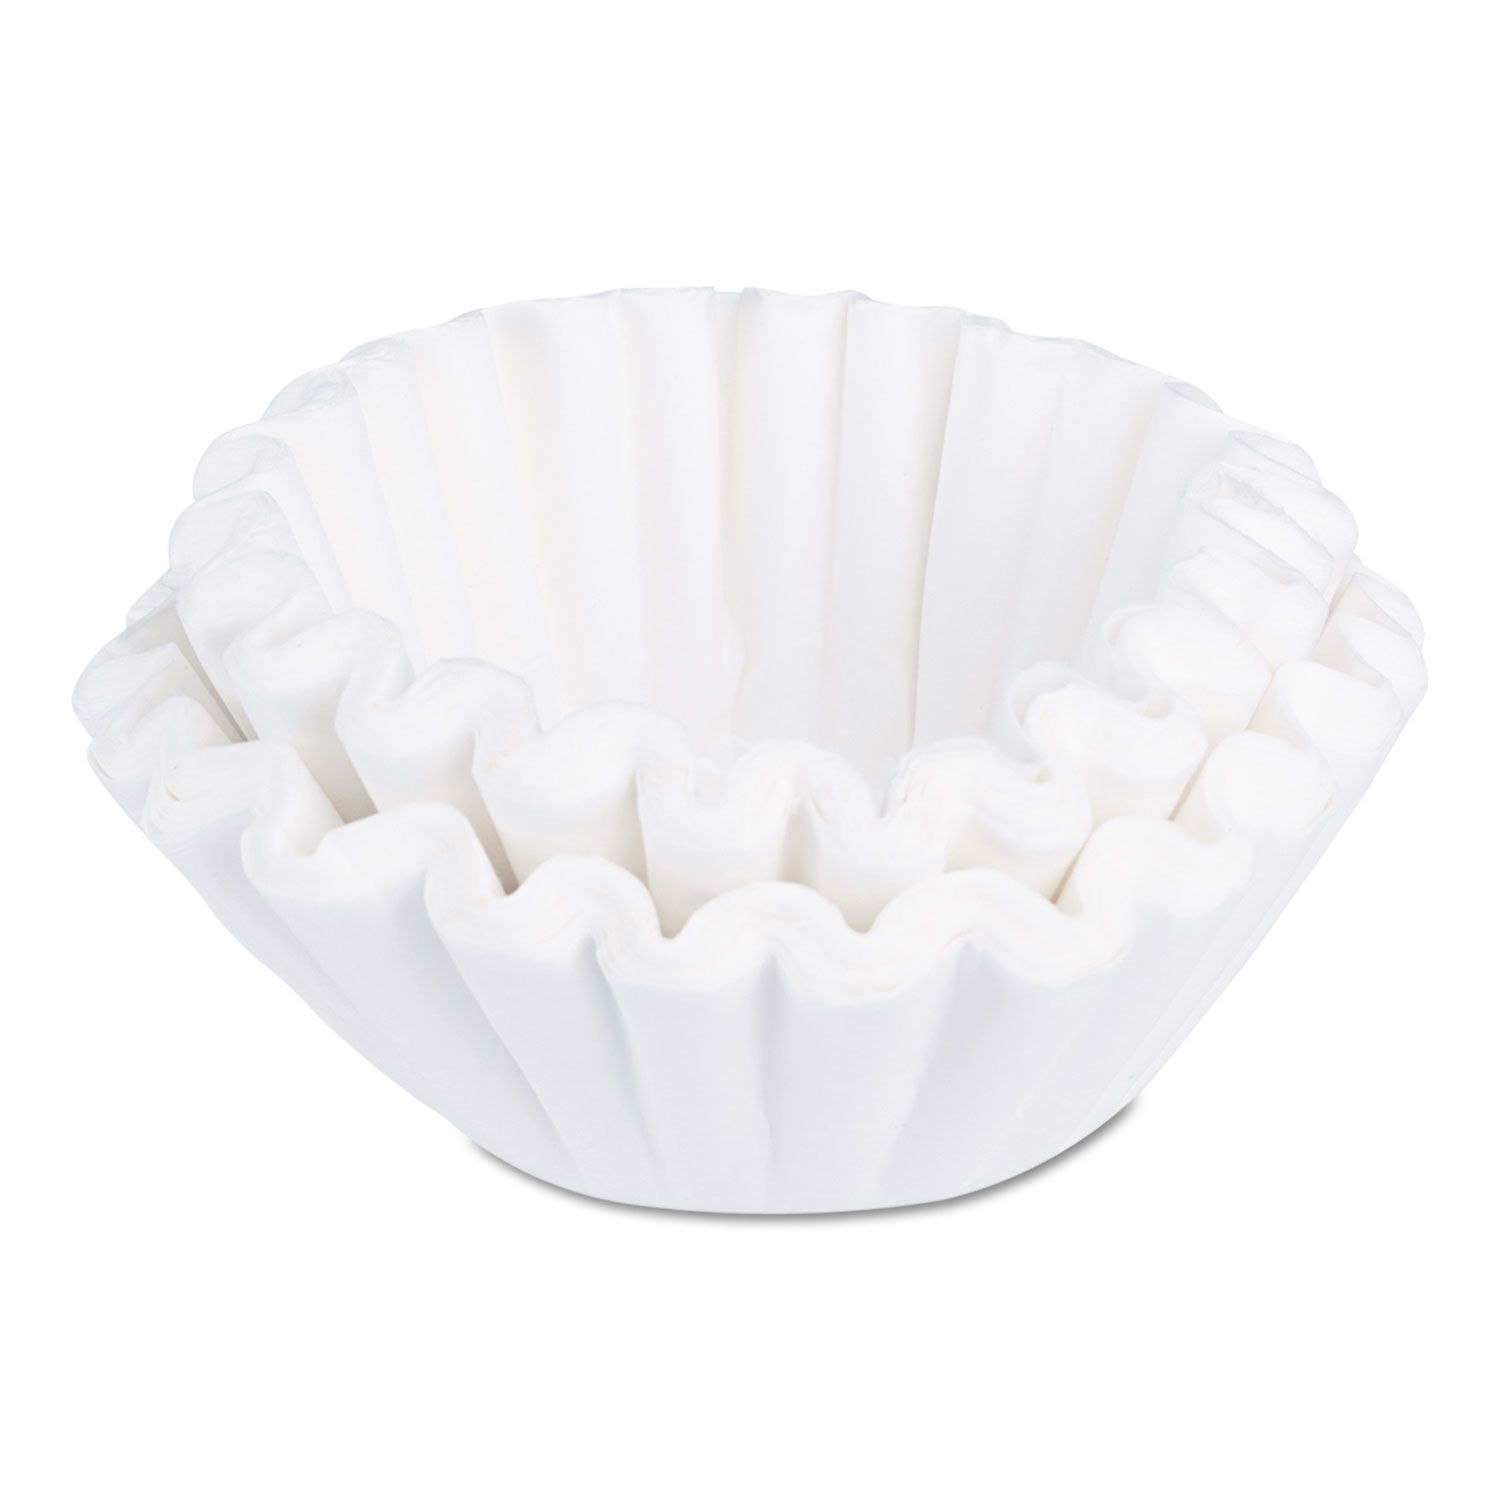  BUNN 20138.1000 Commercial Coffee Filters, 1.5 Gallon Brewer, 500/Pack (BUNGOURMET504) 